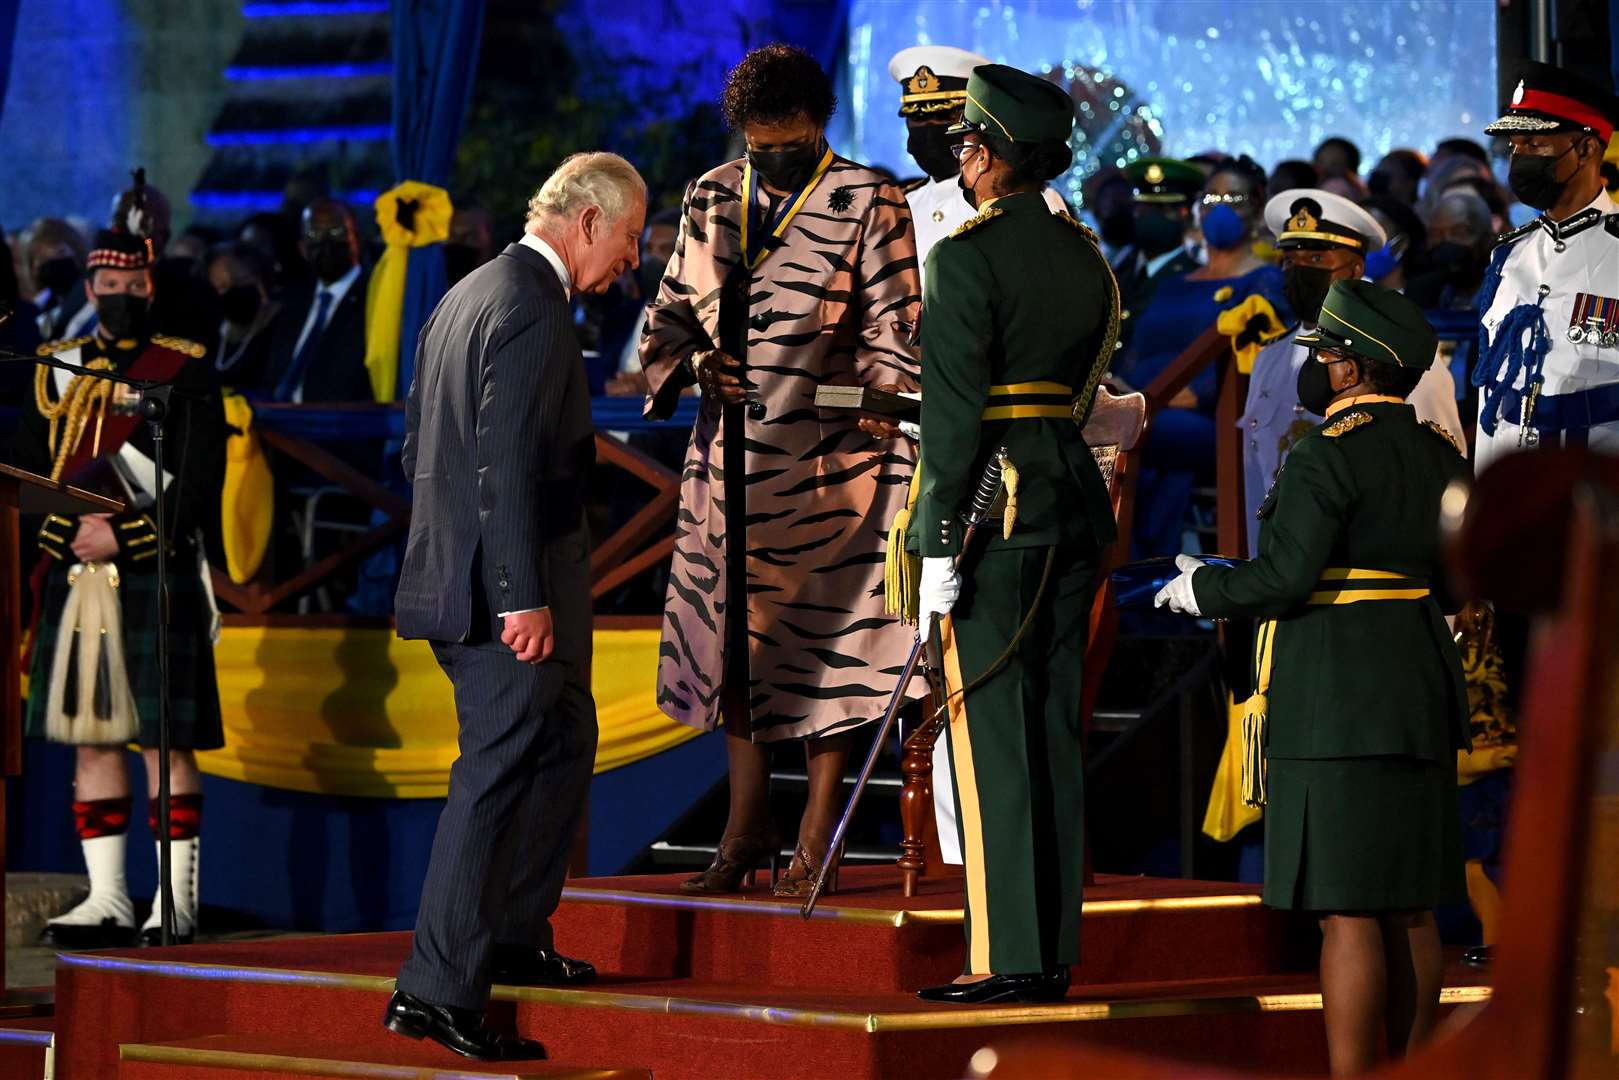 Charles receives the Freedom of Barbados award from Dame Sandra Mason during her presidential inauguration ceremony as the country became a republic in 2021 (Jeff J Mitchell/PA)